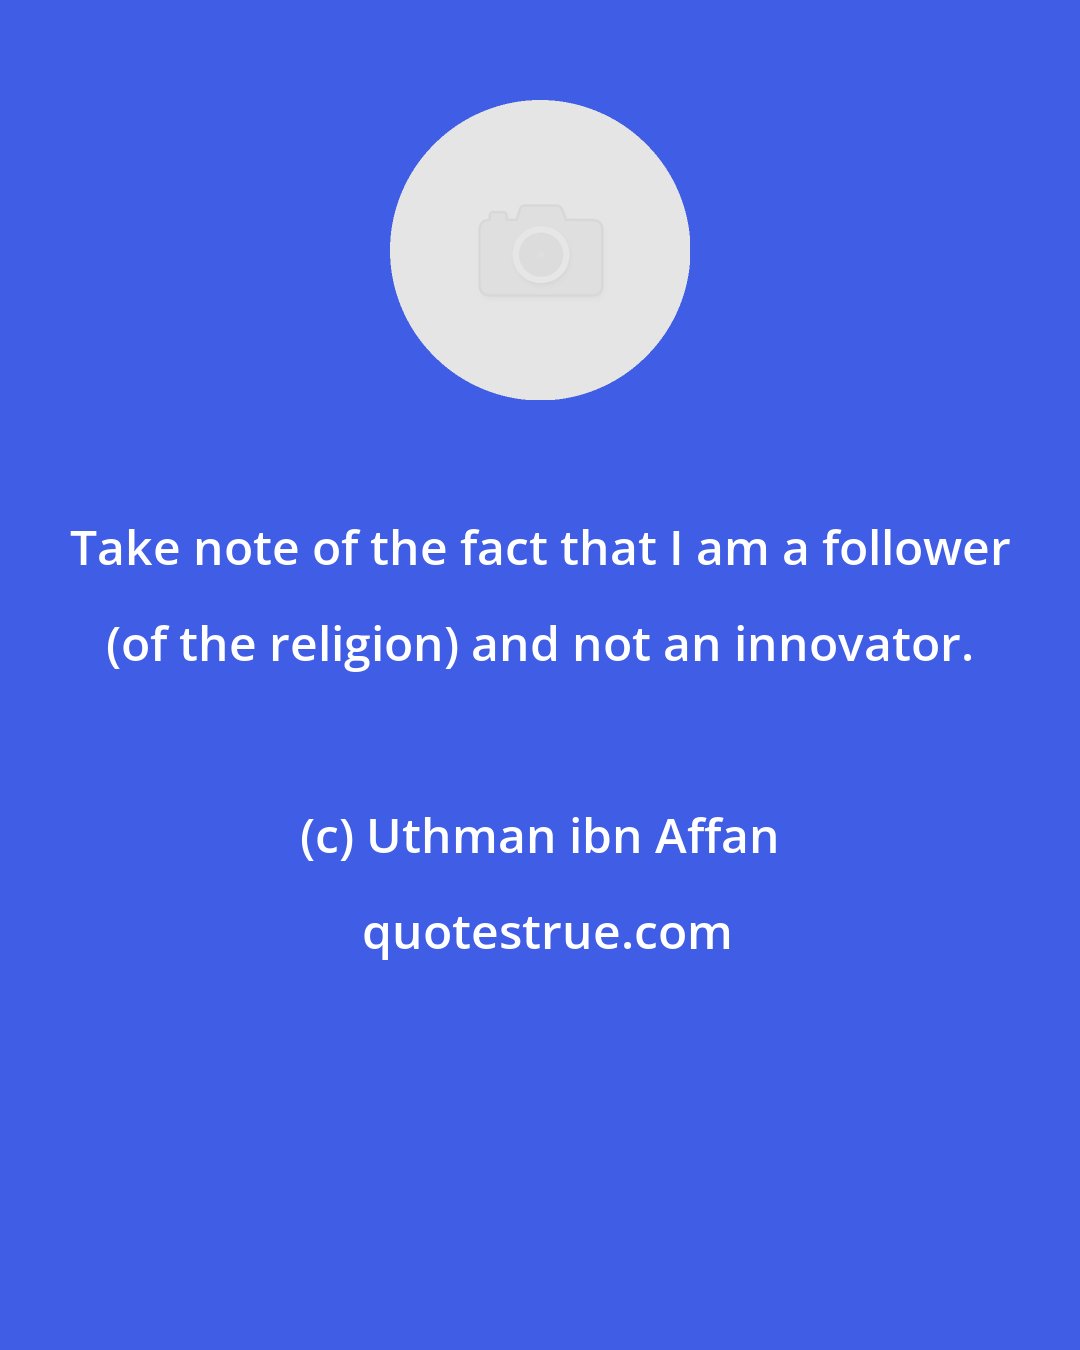 Uthman ibn Affan: Take note of the fact that I am a follower (of the religion) and not an innovator.